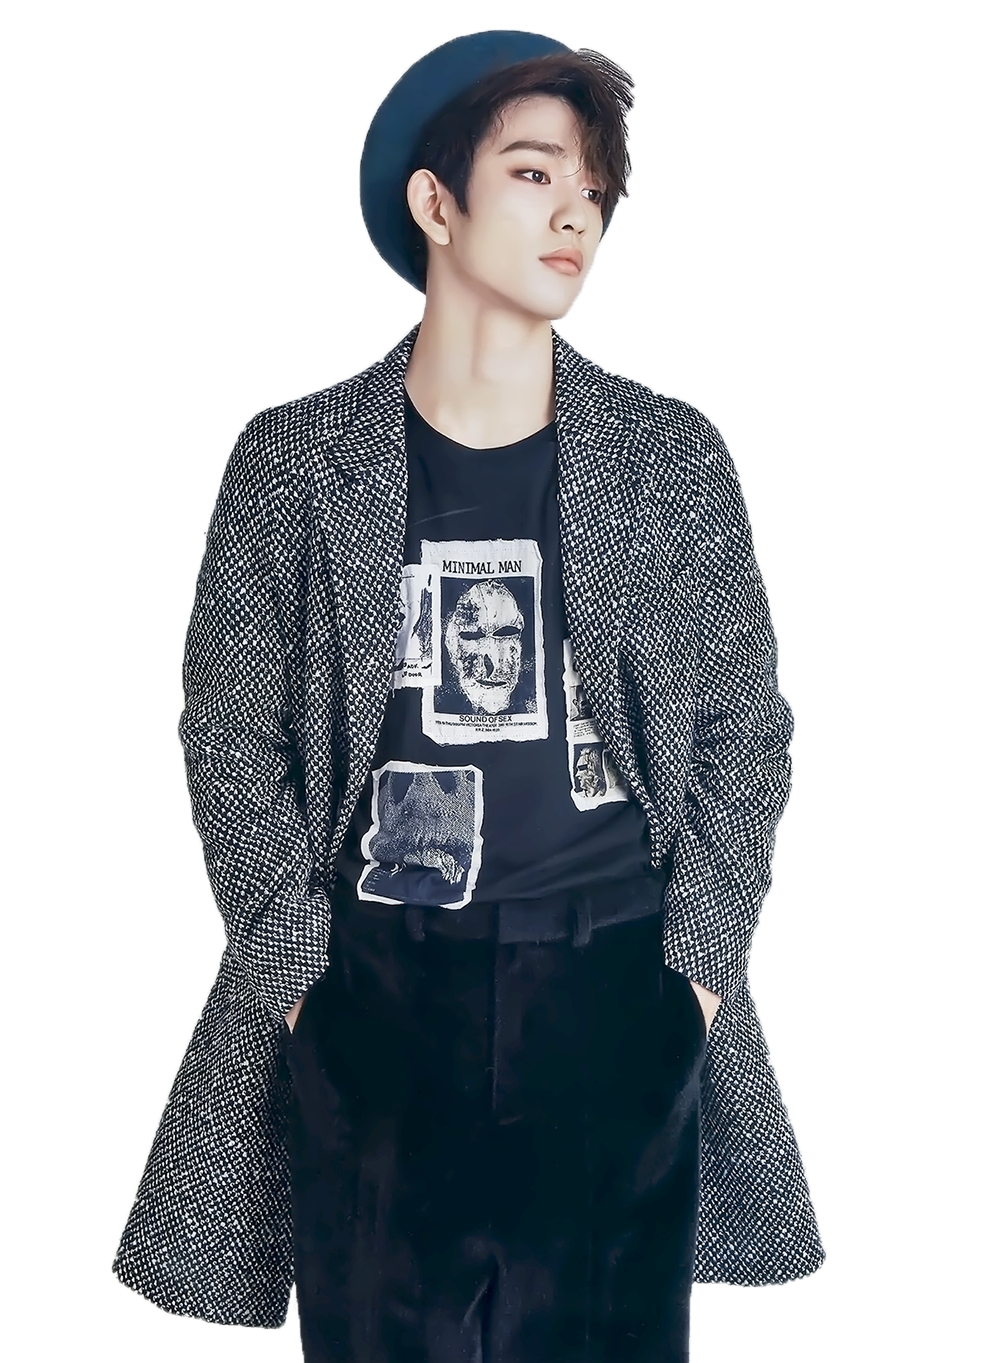 Jinyoung Got7 PNG Background Image